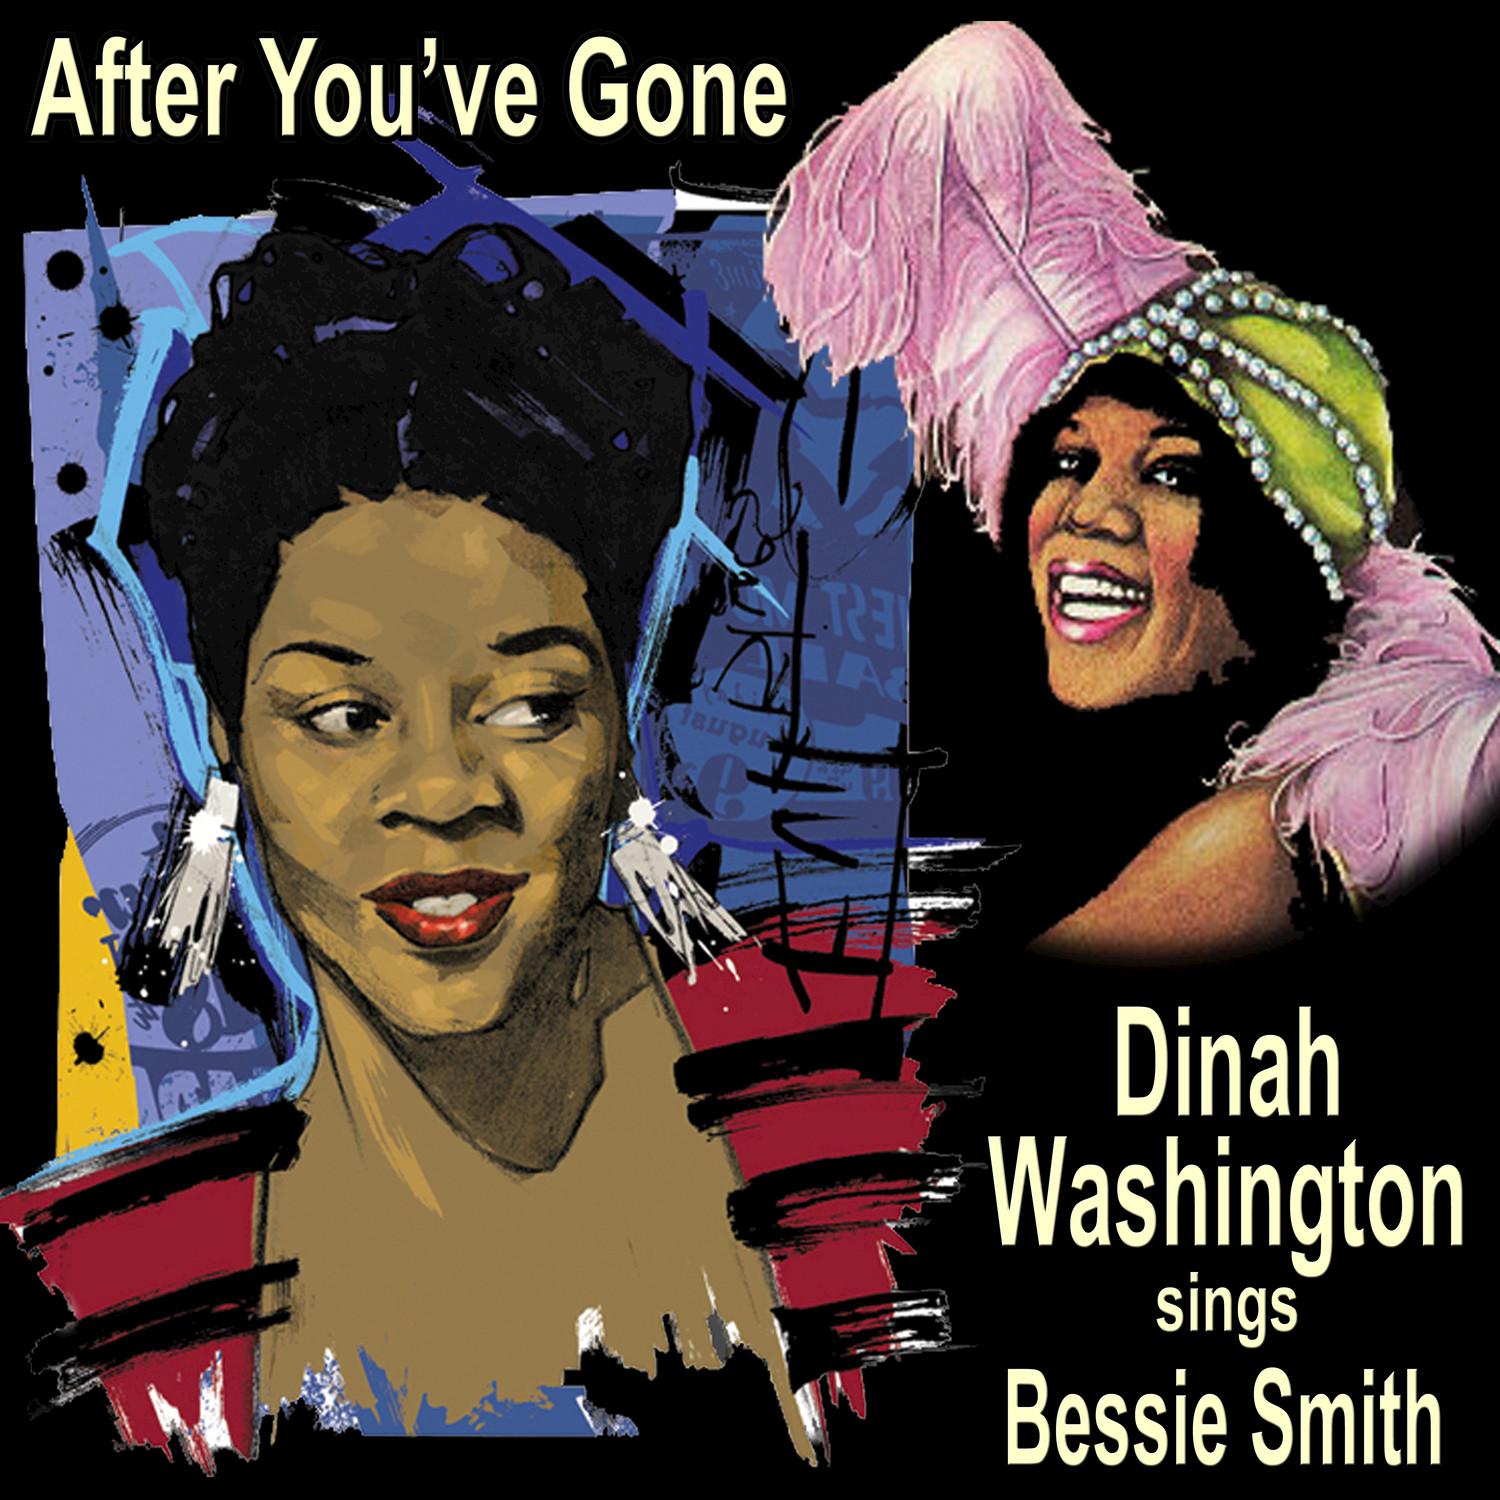 After You've Gone - Dinah Washington Sings Bessie Smith